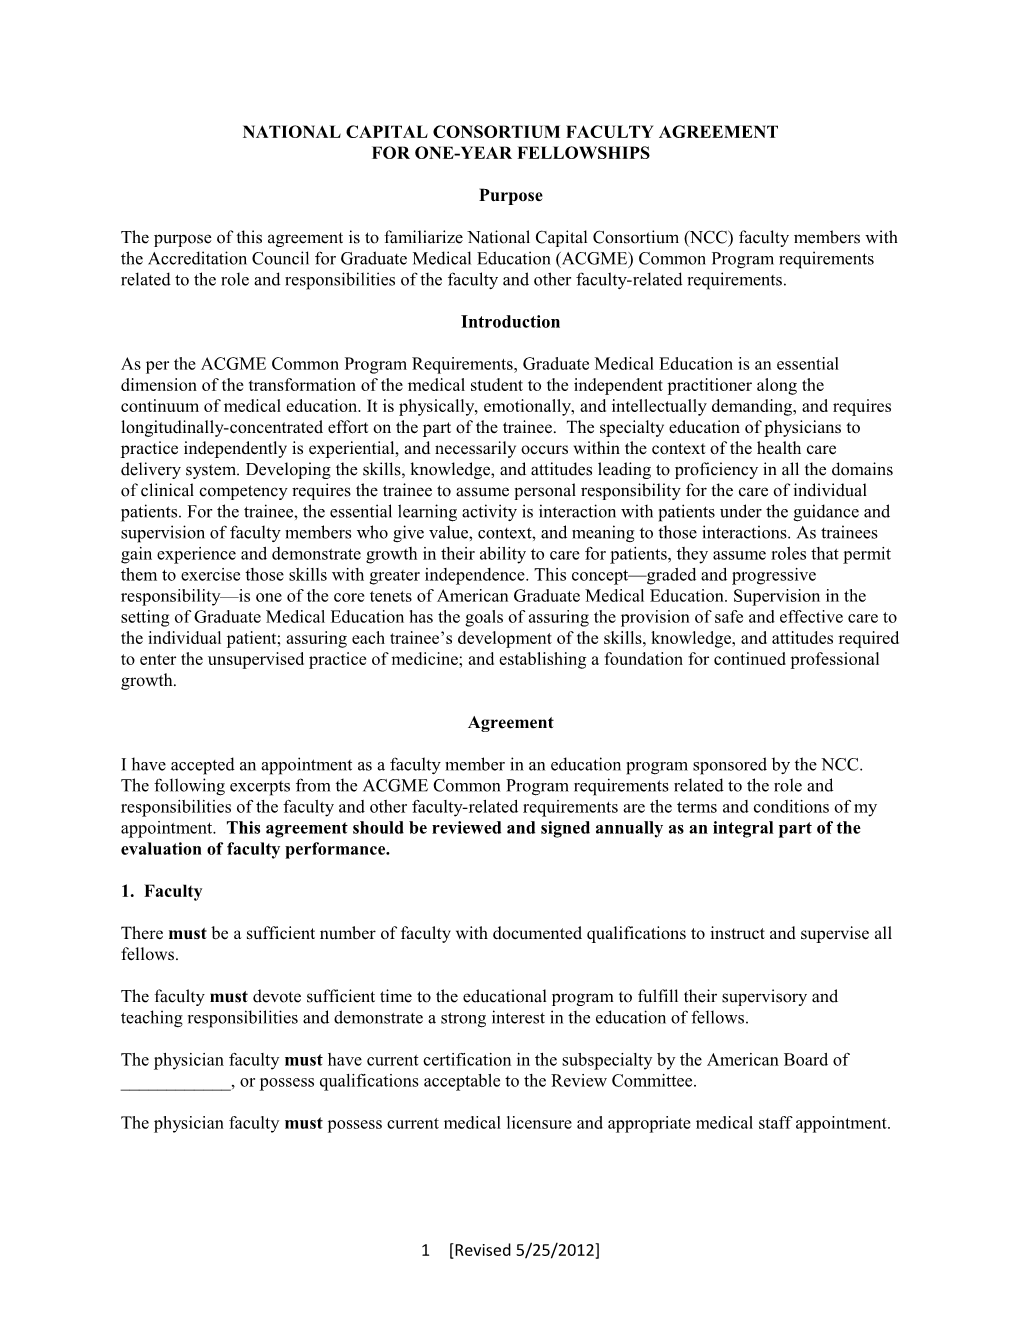 National Capital Consortium Faculty Agreement